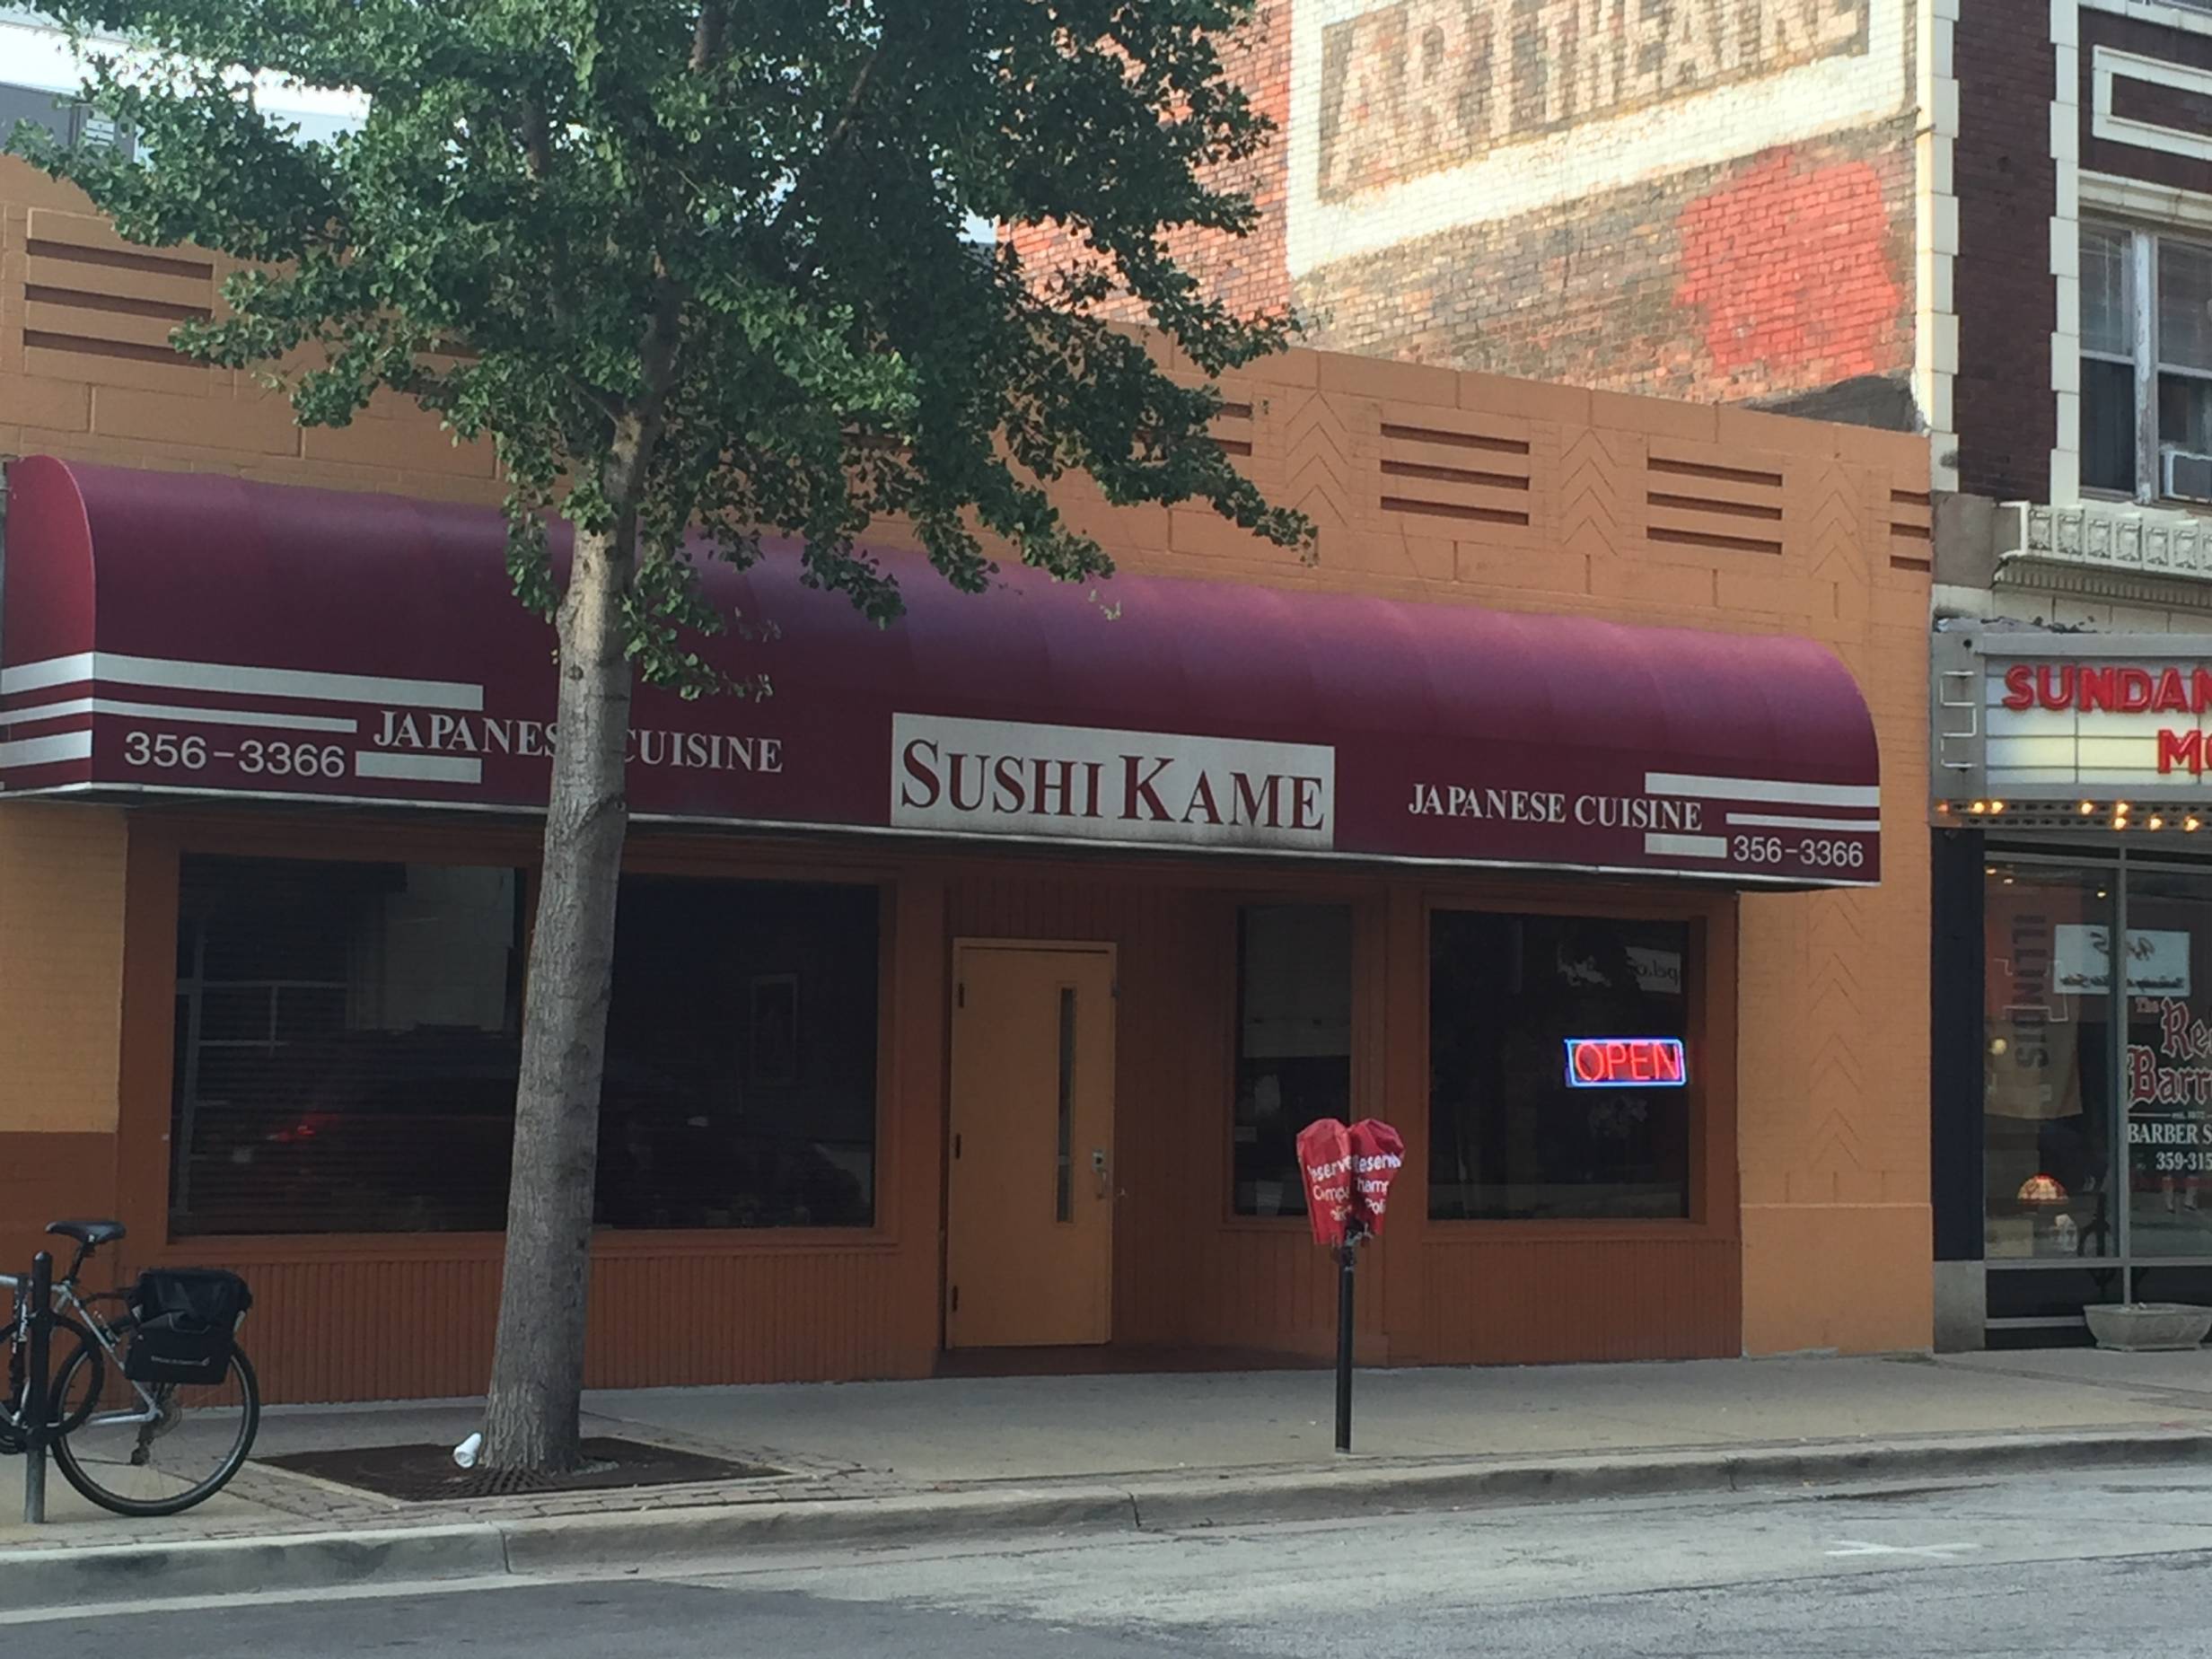 Sushi Kame is not just for sushi lovers